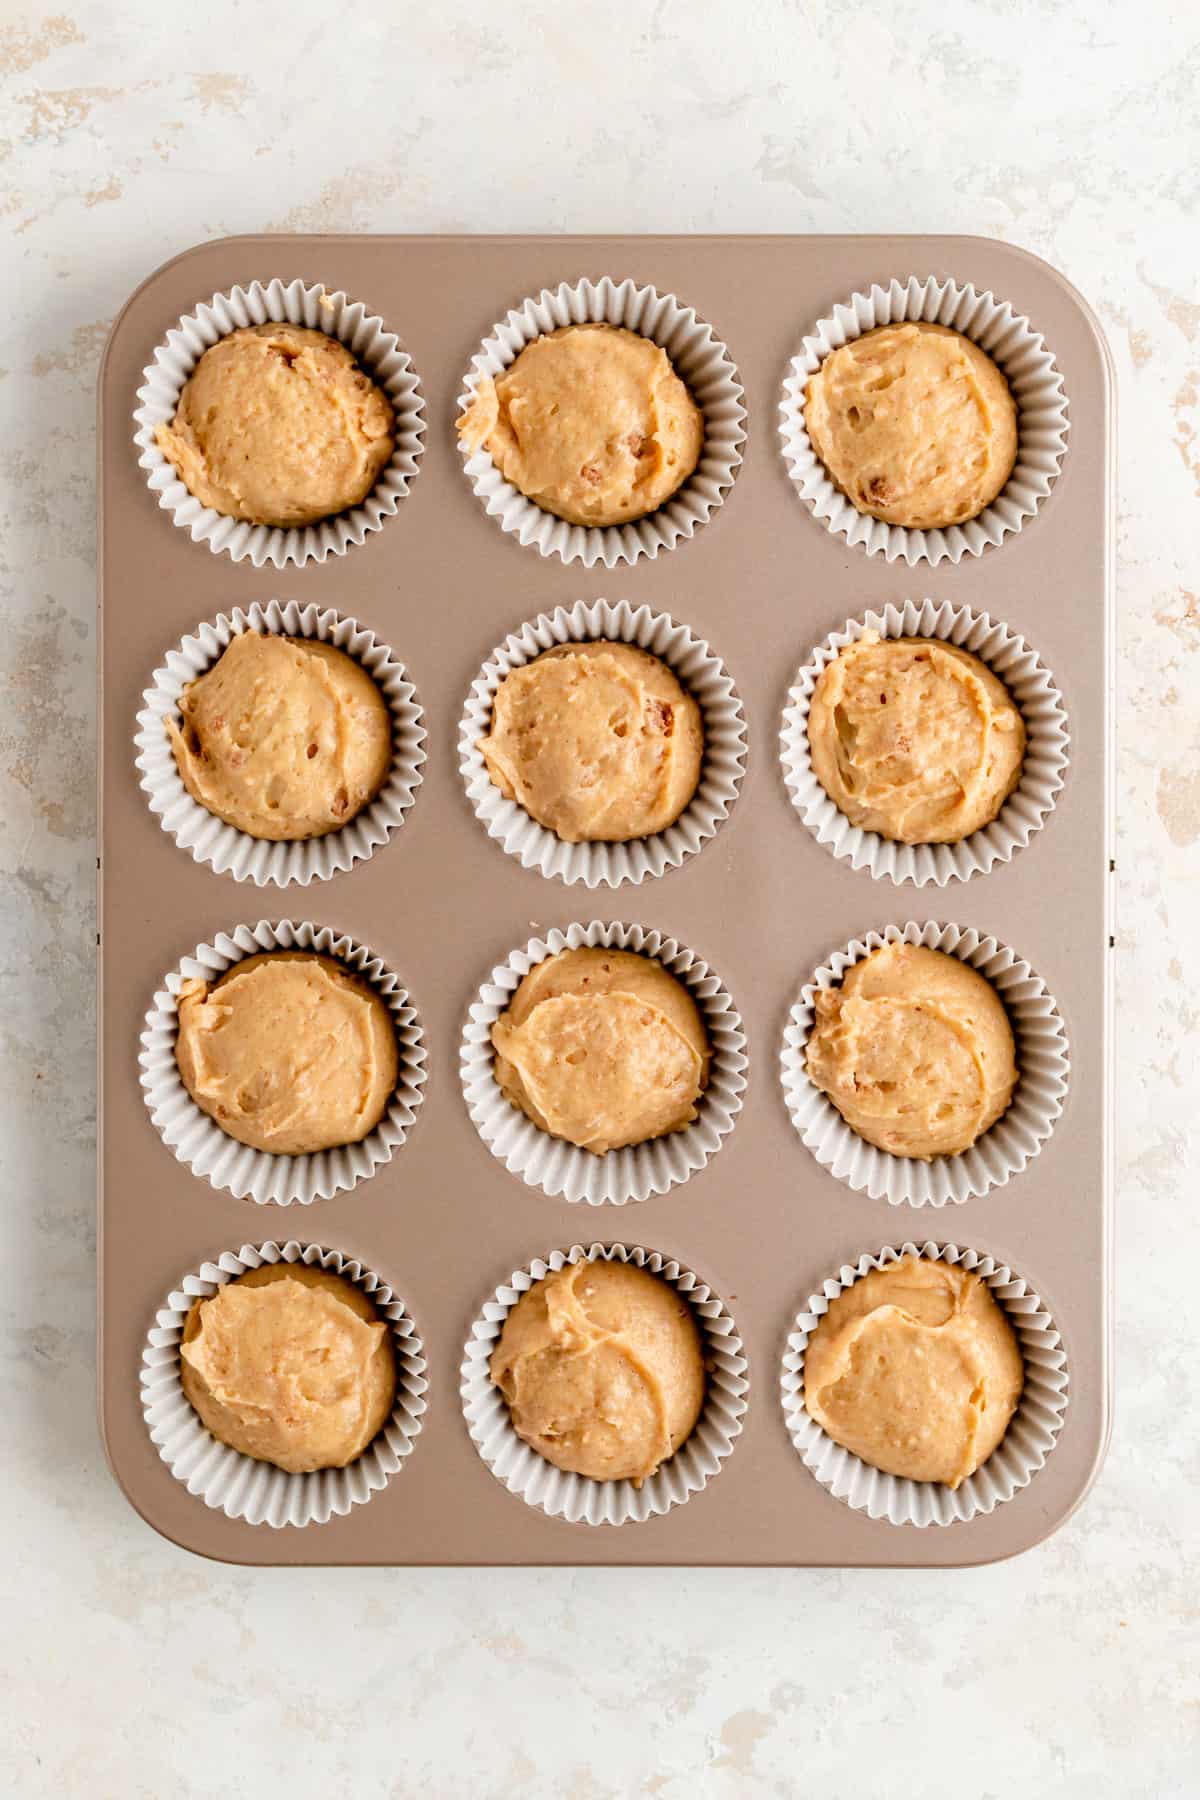 12 scoops of muffin batter in white papers in champagne pan on white background.